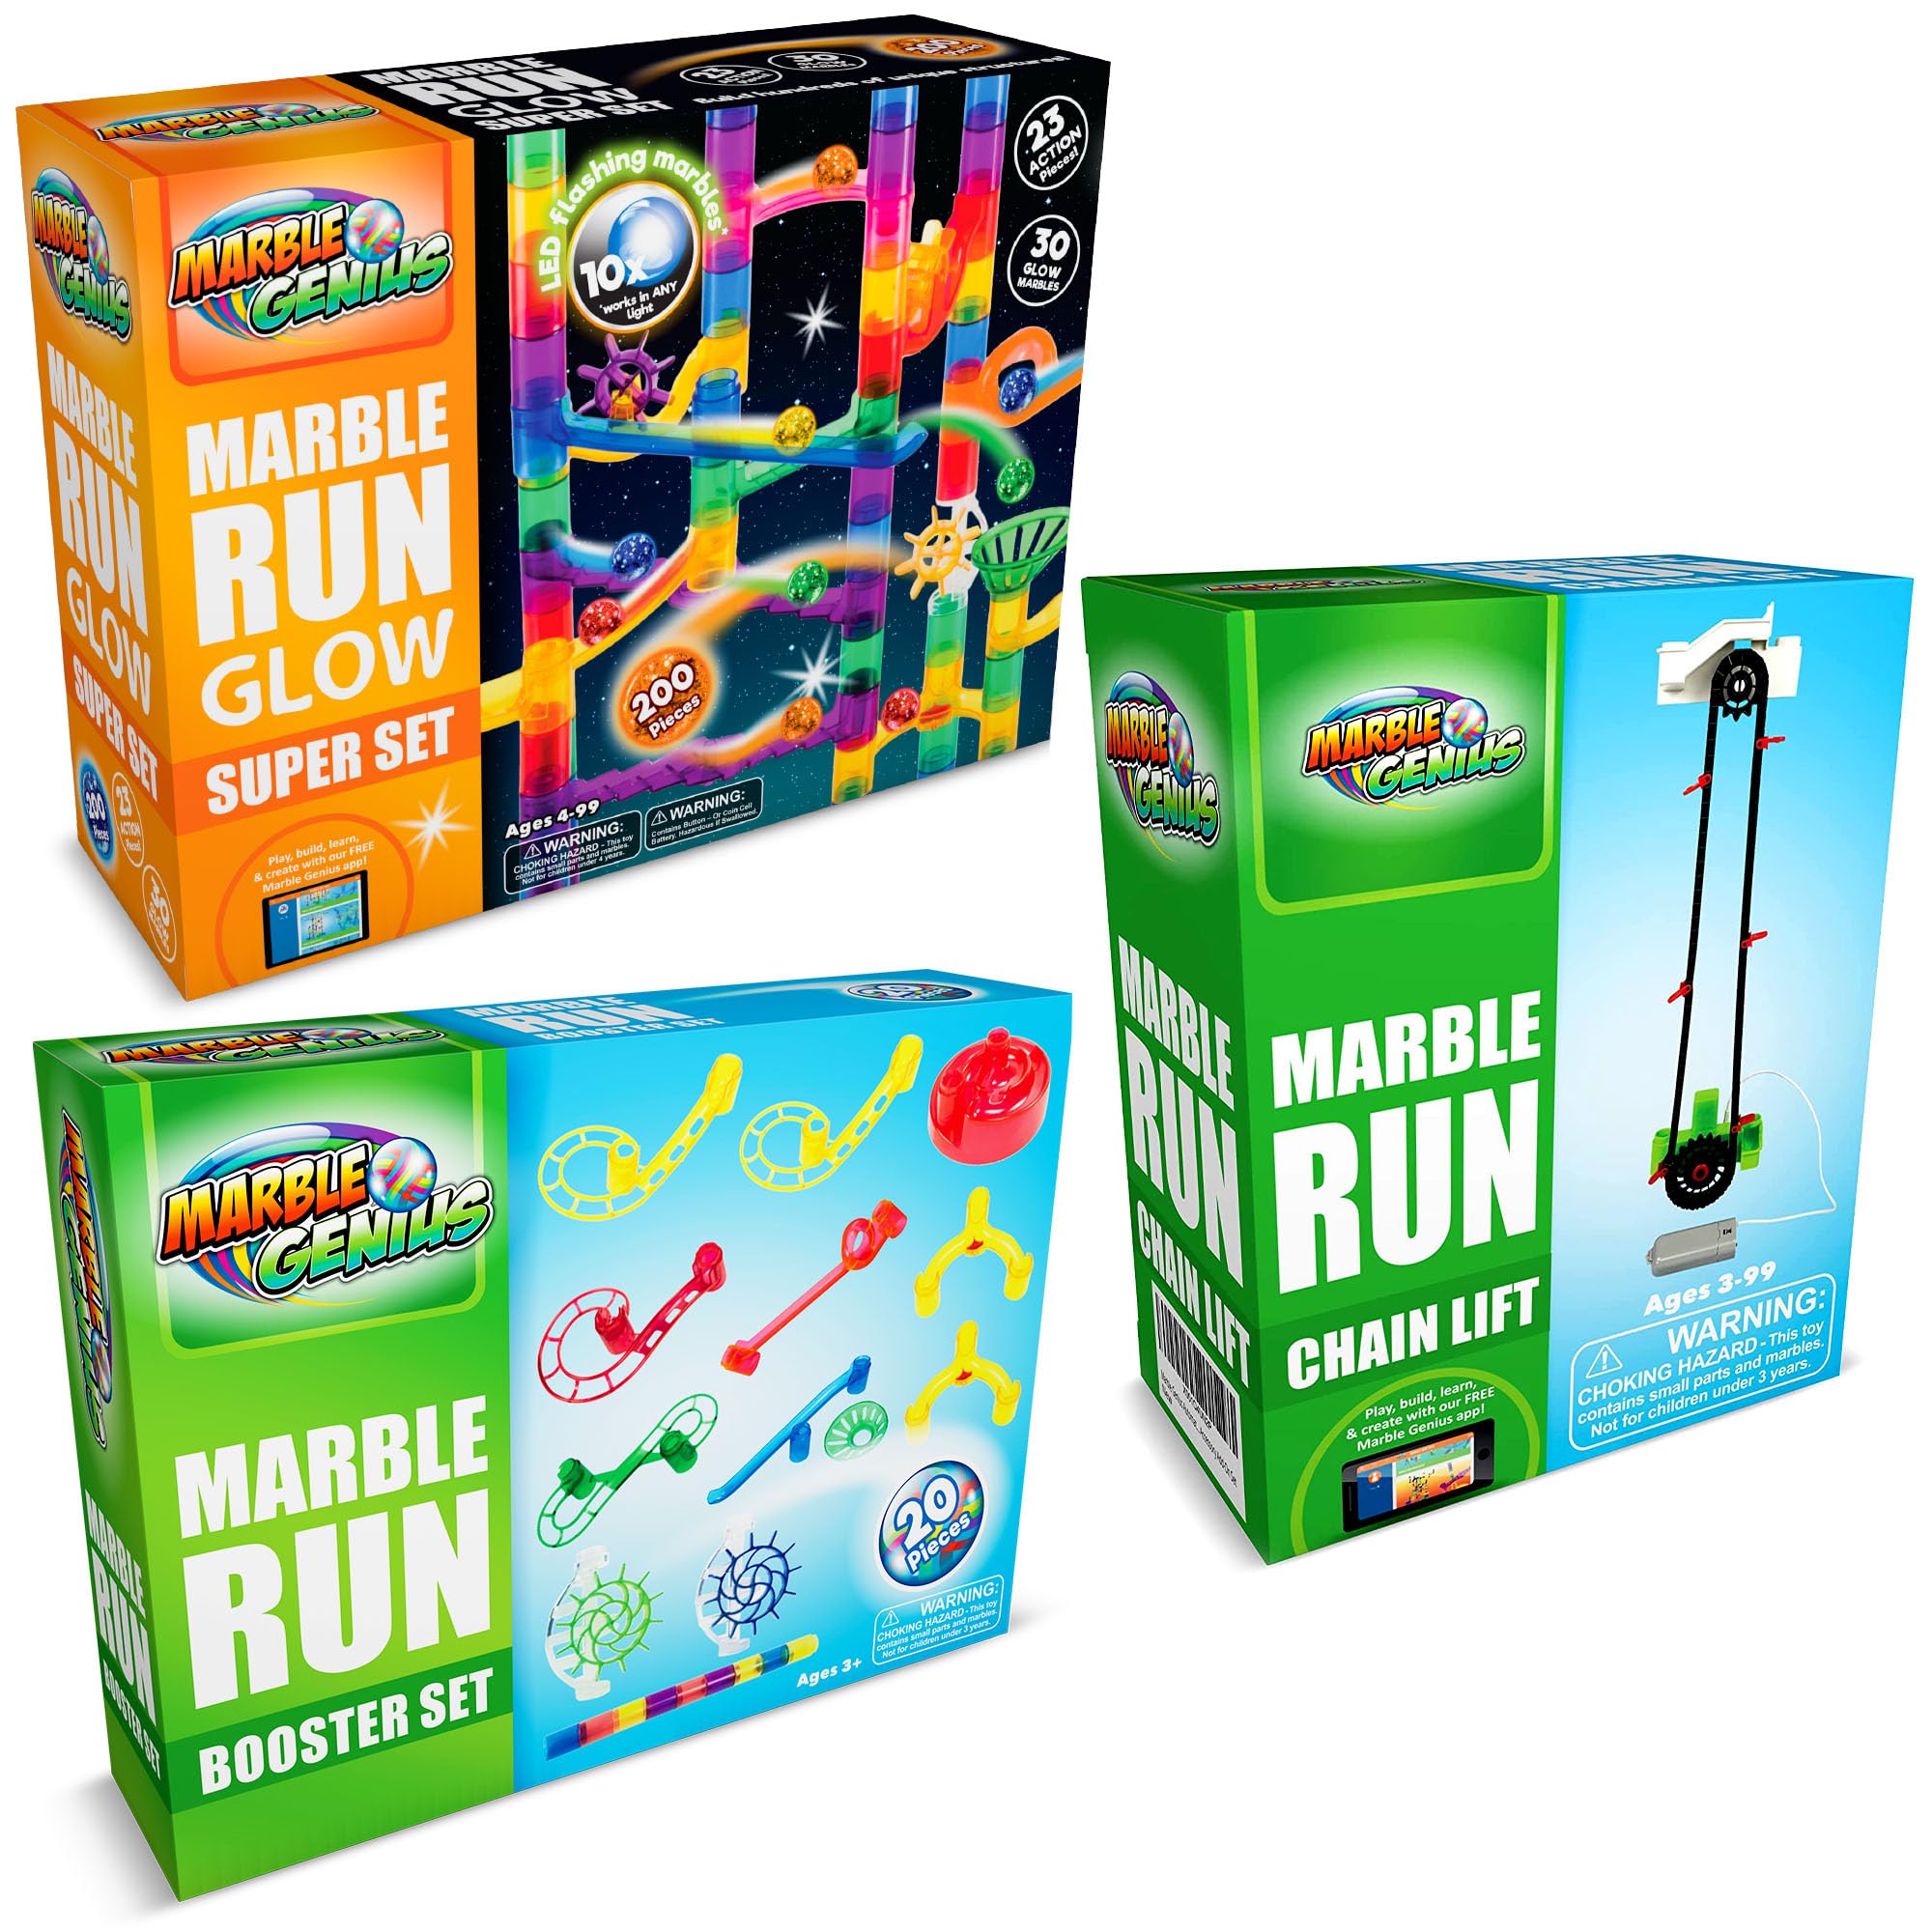 Marble Genius Bundle: Marble Maze Glow in The Dark (200 Pieces), Automatic Chain Lift, Marble Run Booster Set (20 Pieces), Experience The Thrills of Marble Racing